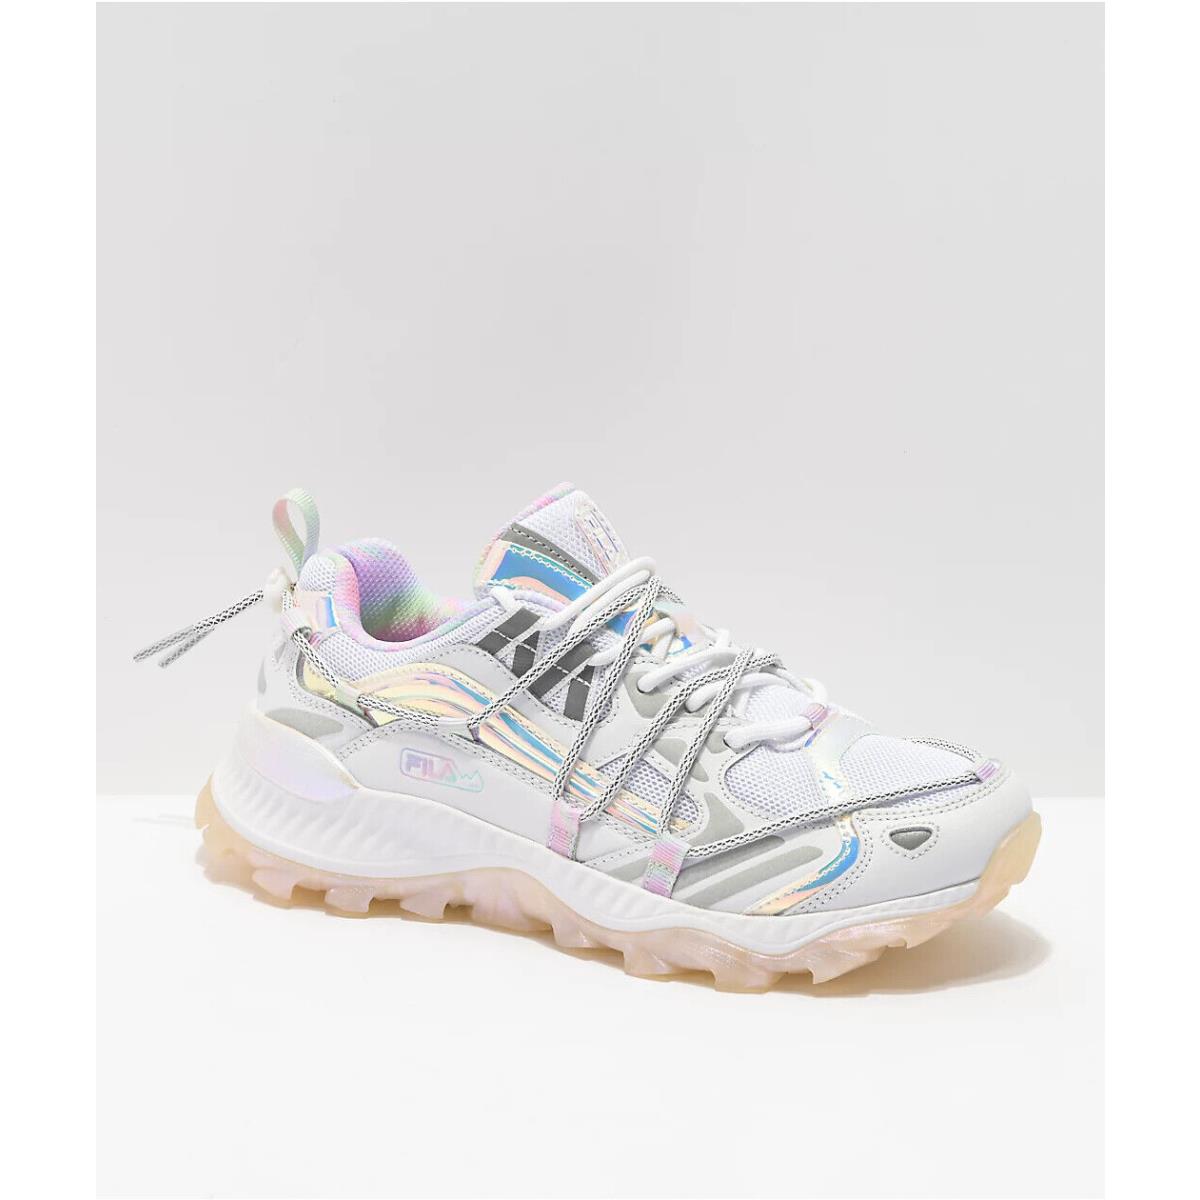 Fila Expeditioner Women`s Sneakers - Athletic Shoes Iridescent - Size 7